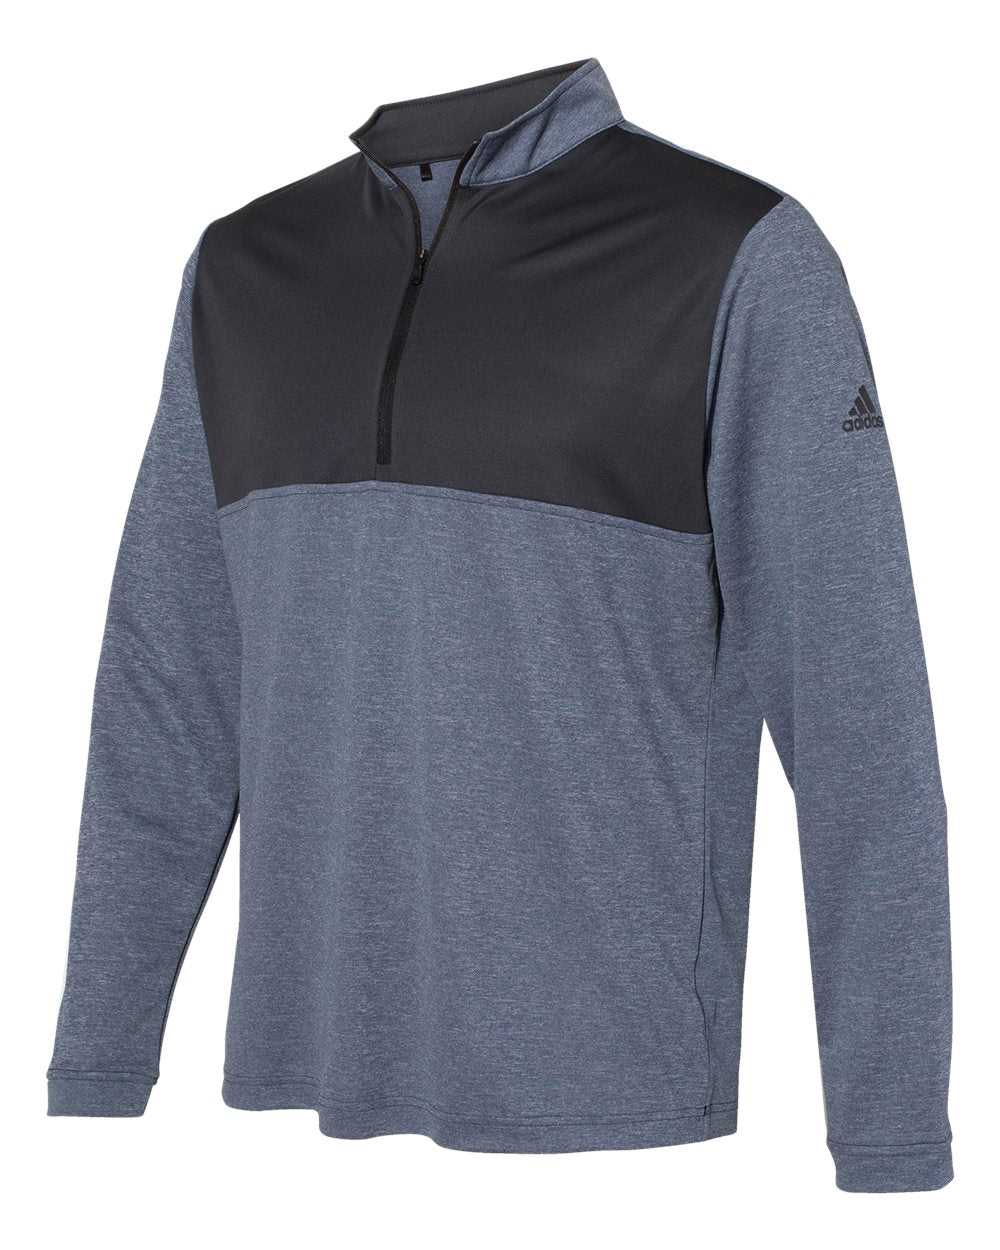 Adidas A280 Lightweight Quarter-Zip Pullover - Collegiate Navy Heather Carbon - HIT a Double